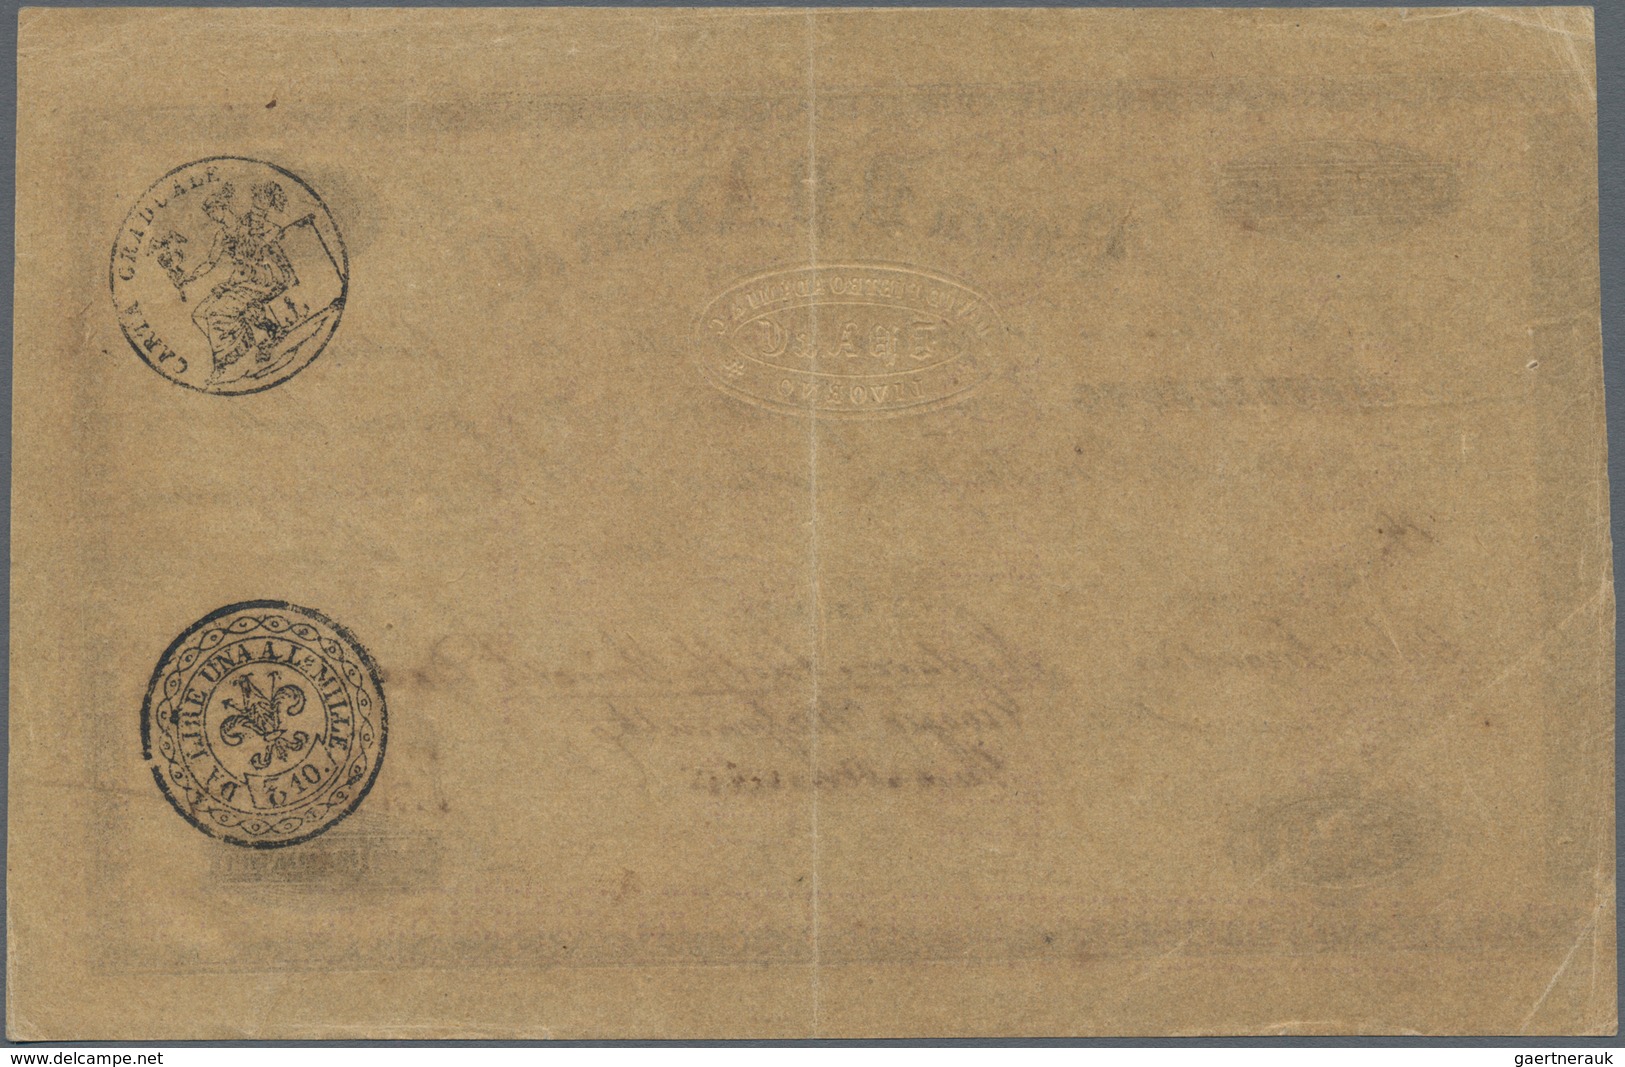 Italy / Italien: Banca D. P. Adami, 500 Lire 1859 P. NL, Very Rare And Seldom Seen Note, Used With C - Other & Unclassified